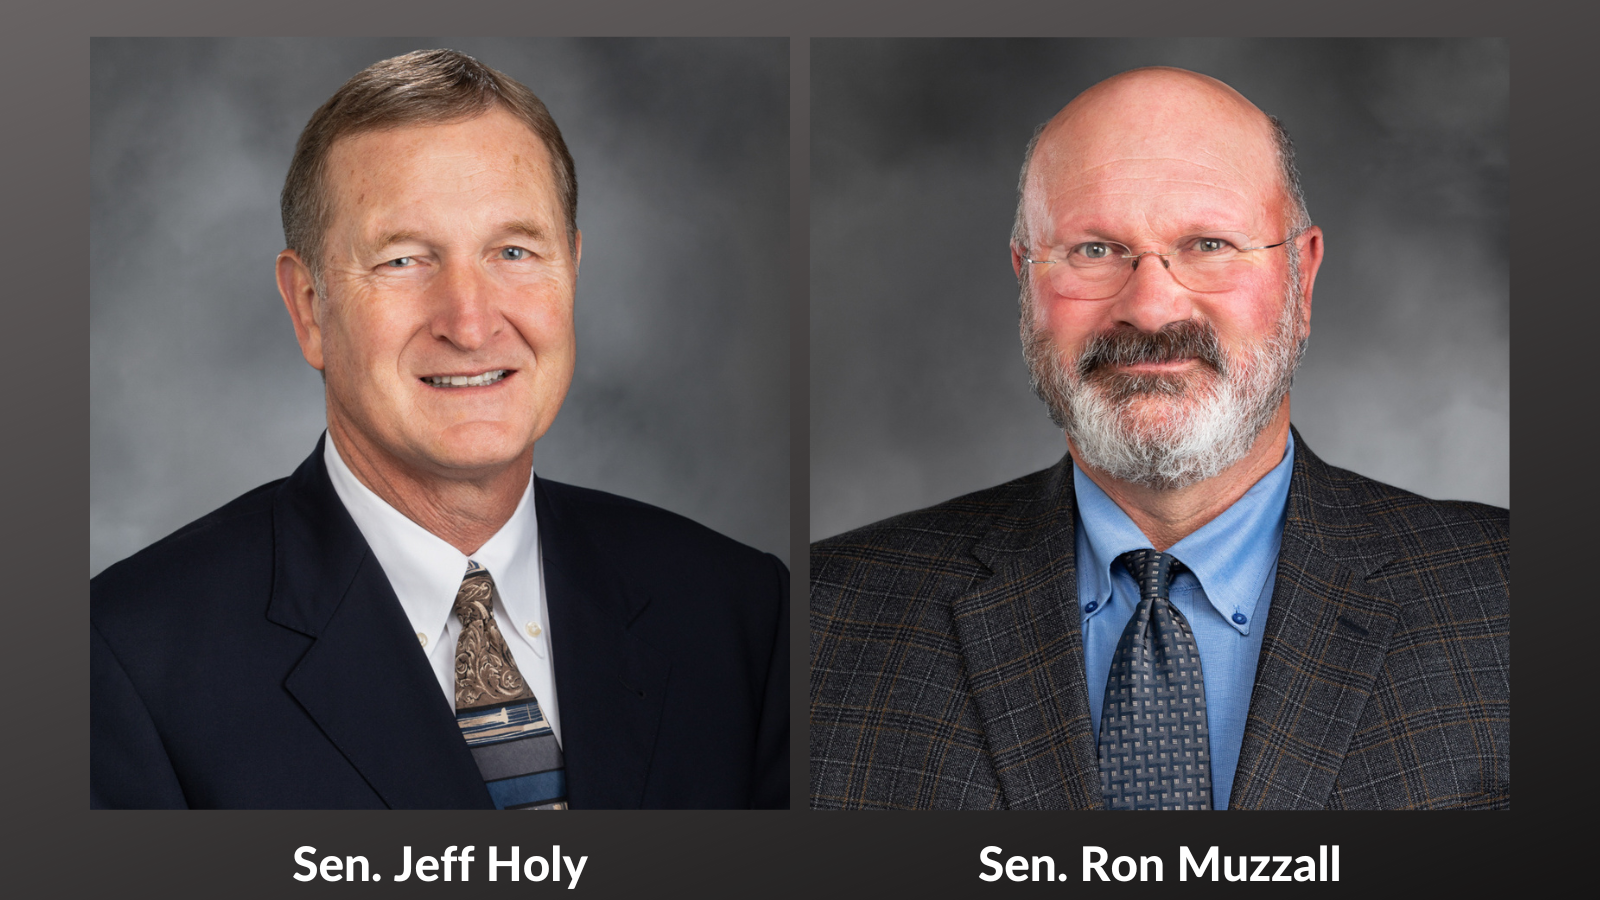 SRC On Air: KUOW: State Democrats want to add abortion rights to the state Constitution, feat. Sens. Jeff Holy and Ron Muzzall